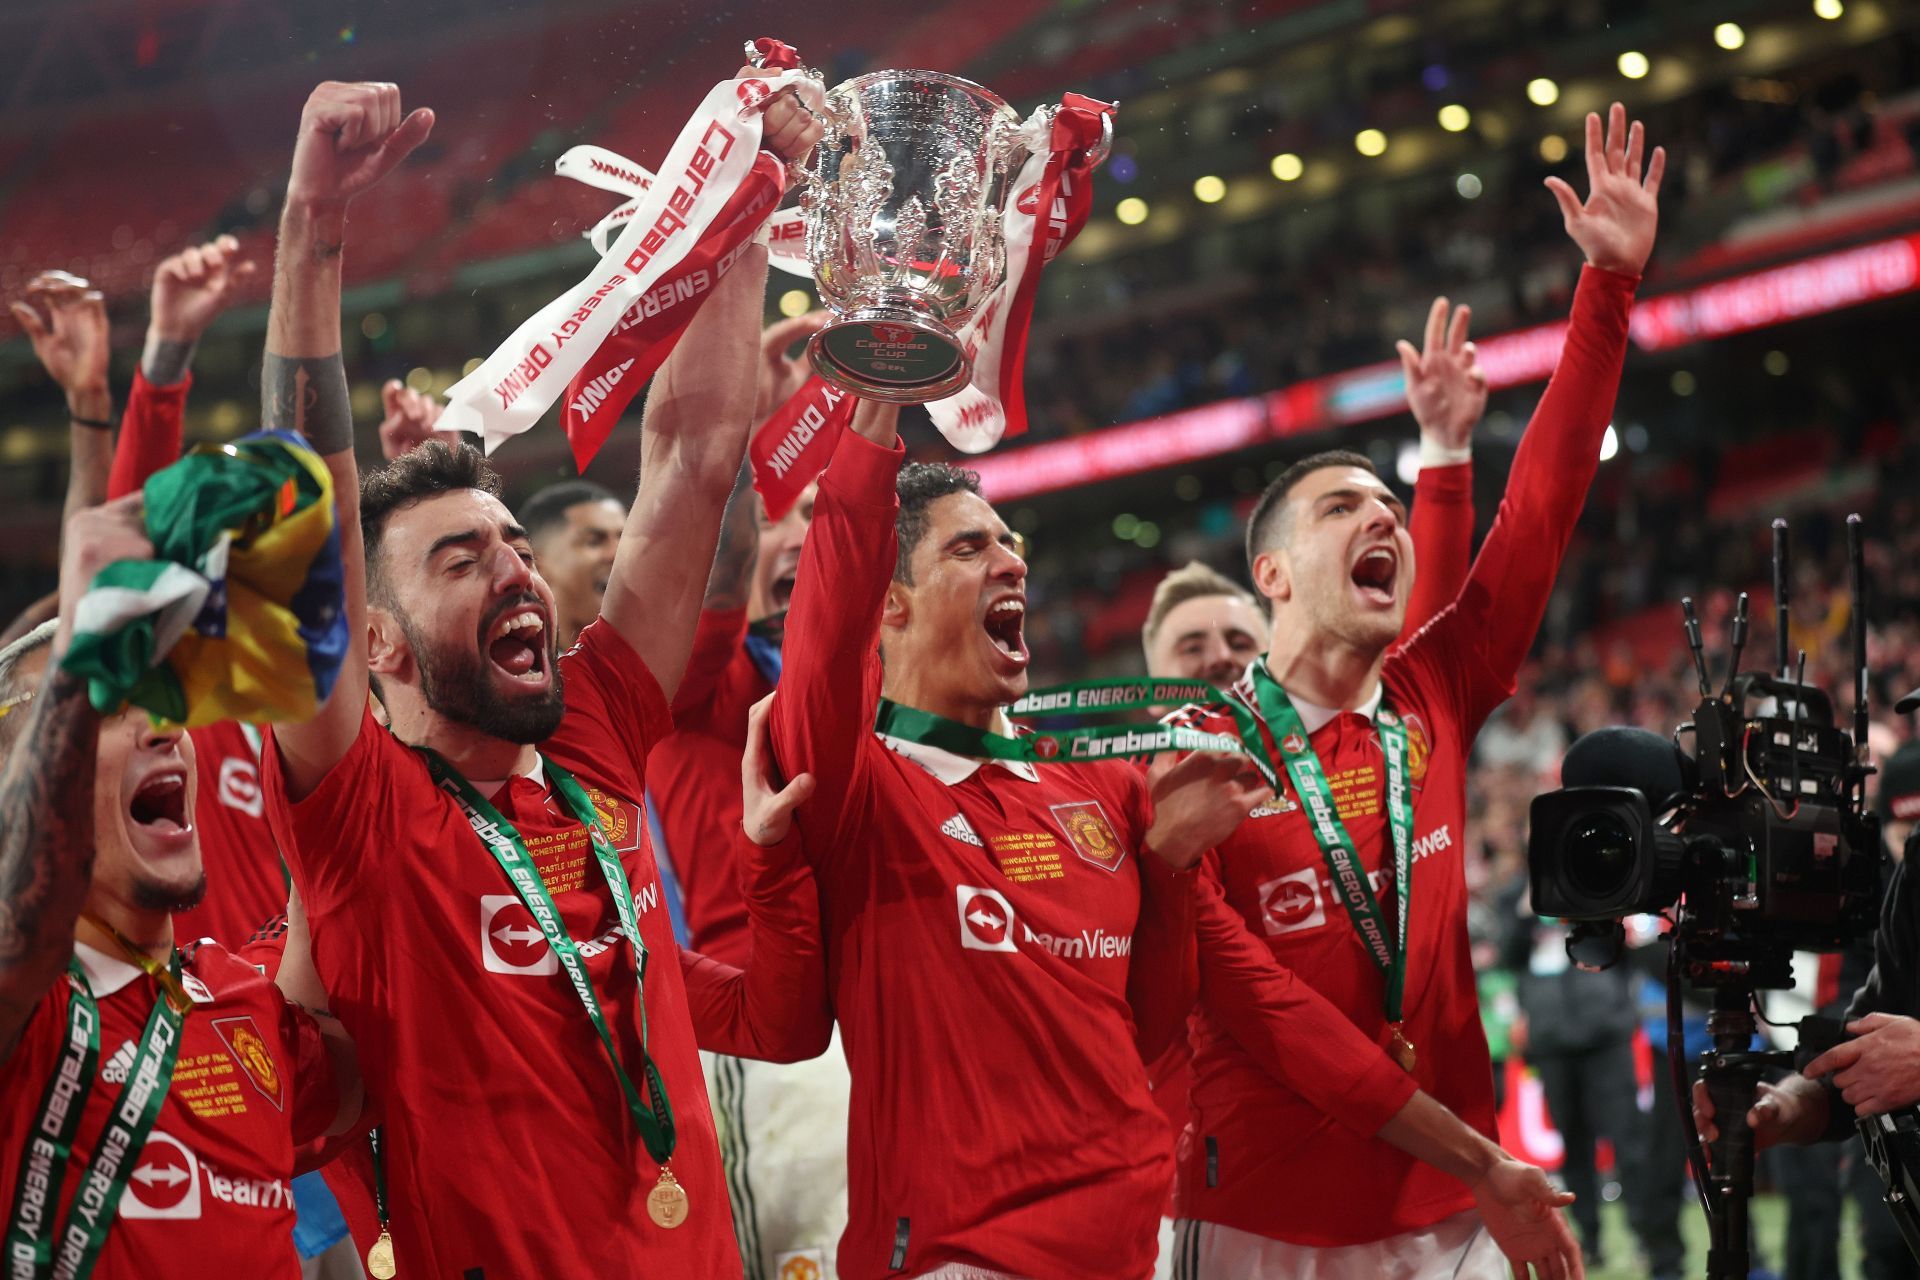 Bruno Fernandes wants more silverware with the Red Devils.